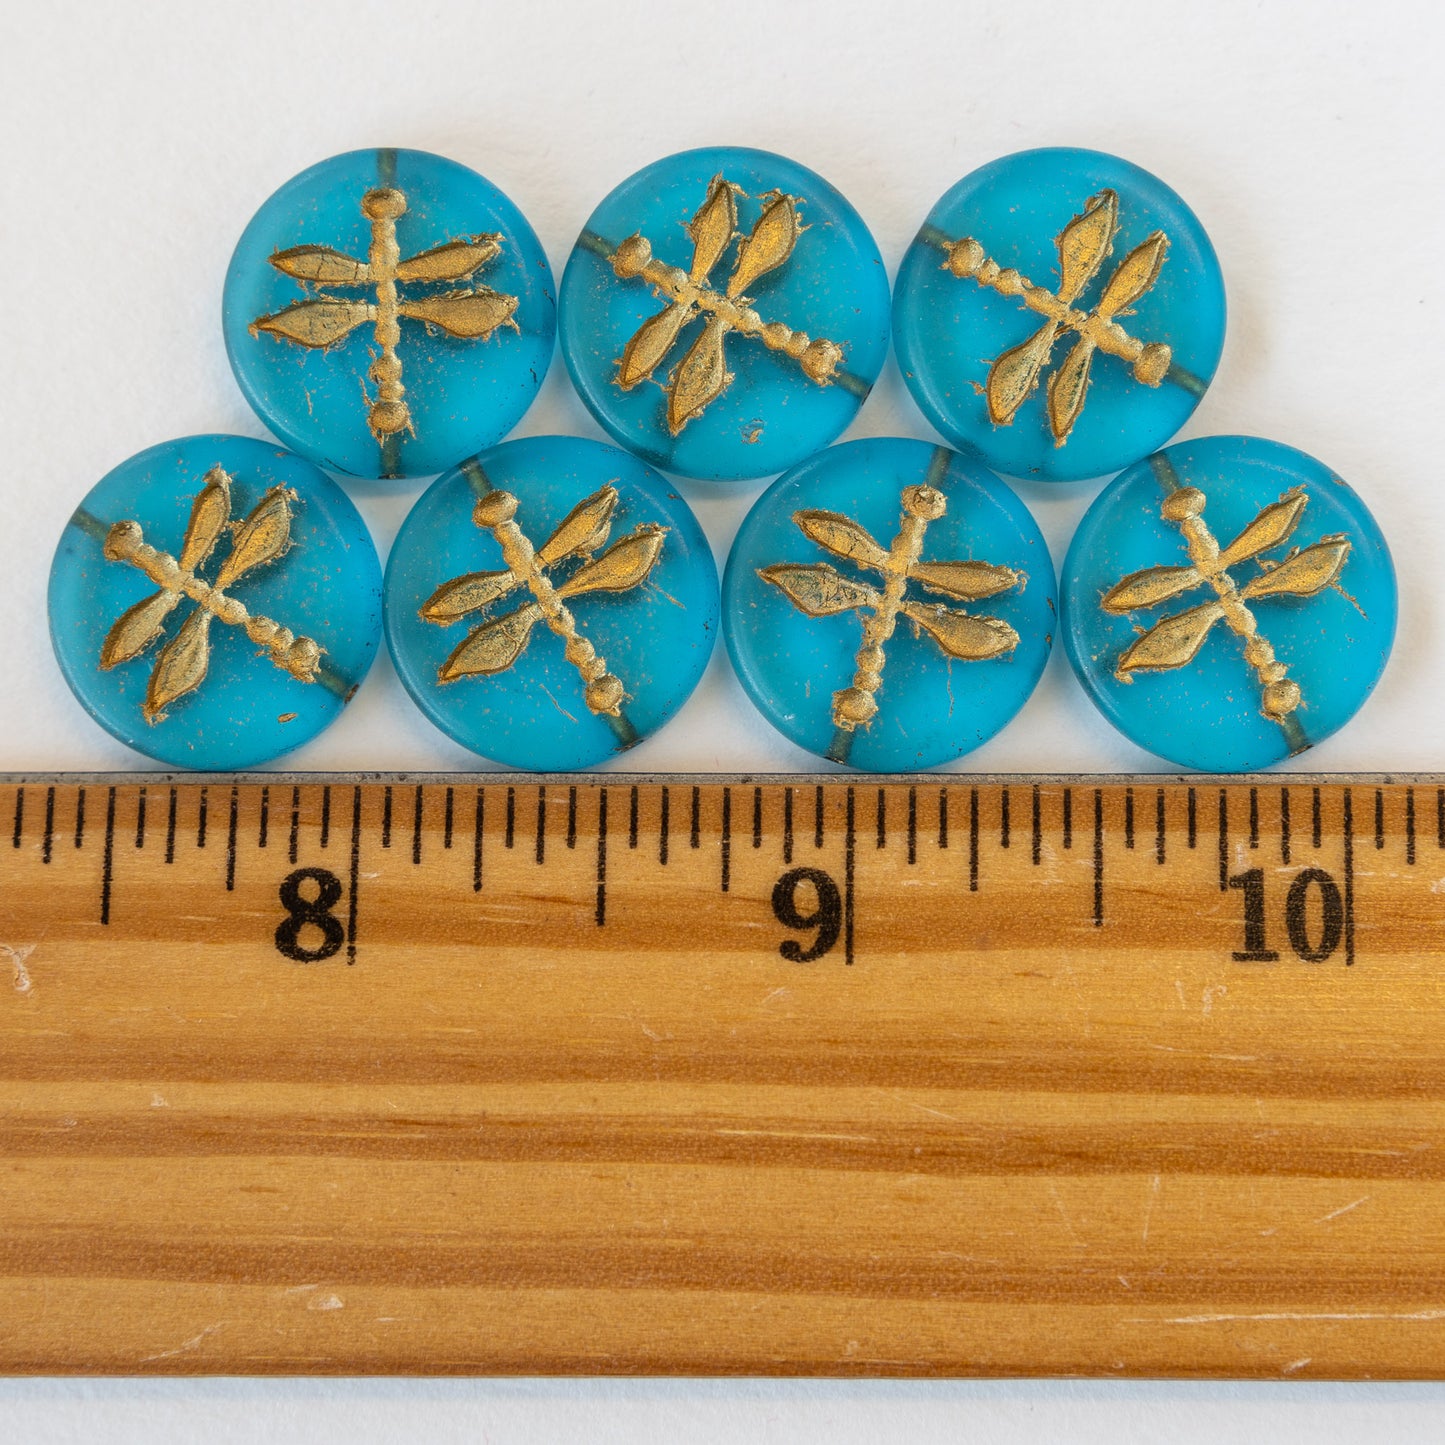 17mm Dragonfly Coin Beads - Dark Aqua with Gold Wash - 4 or 12